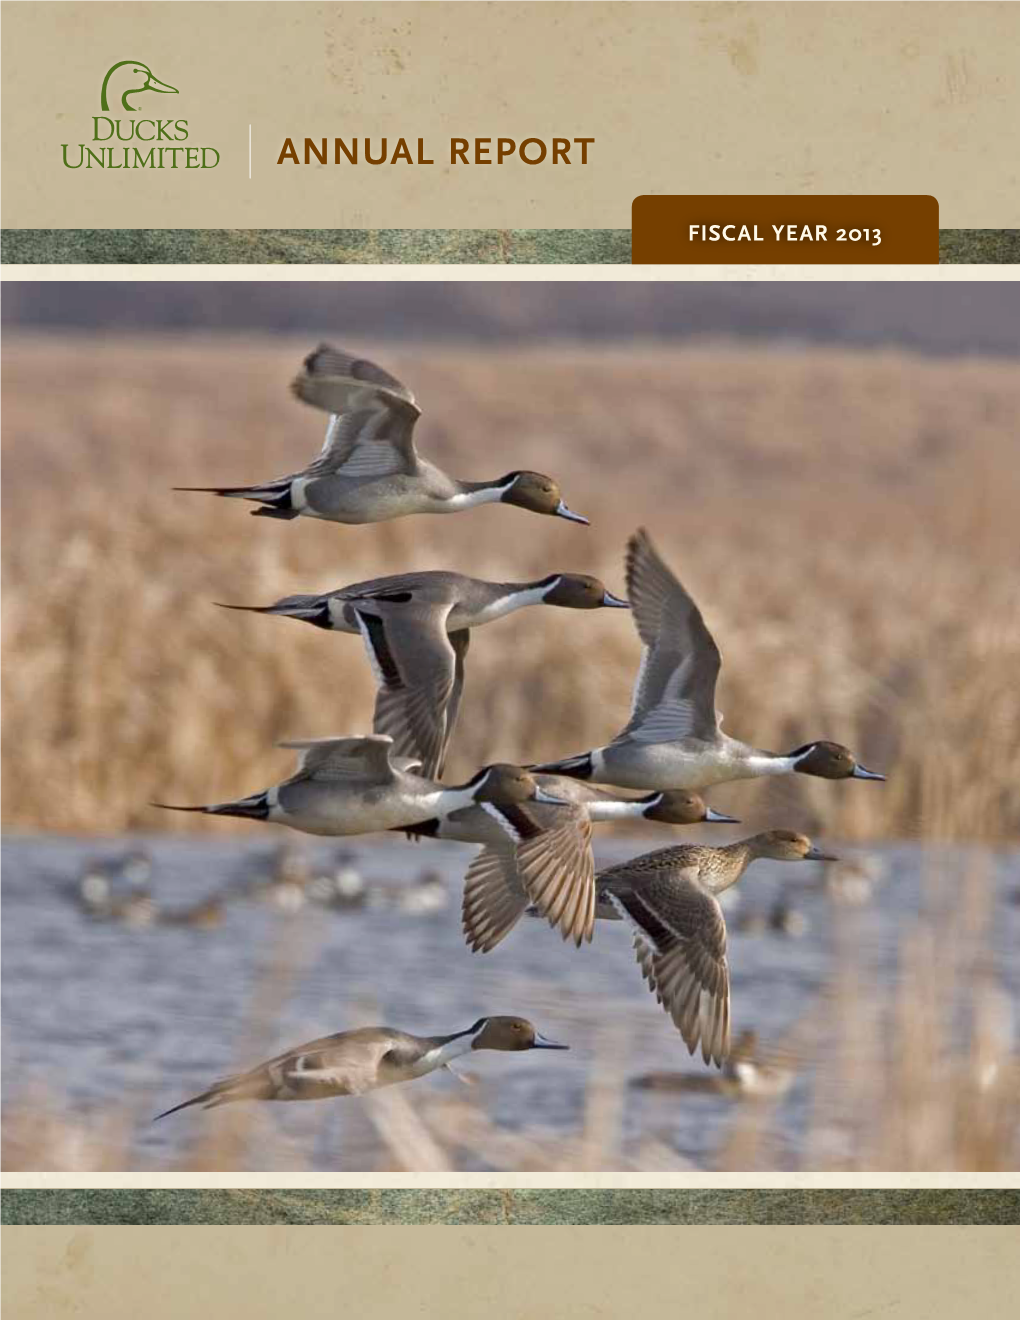 View the 2013 Annual Report As A